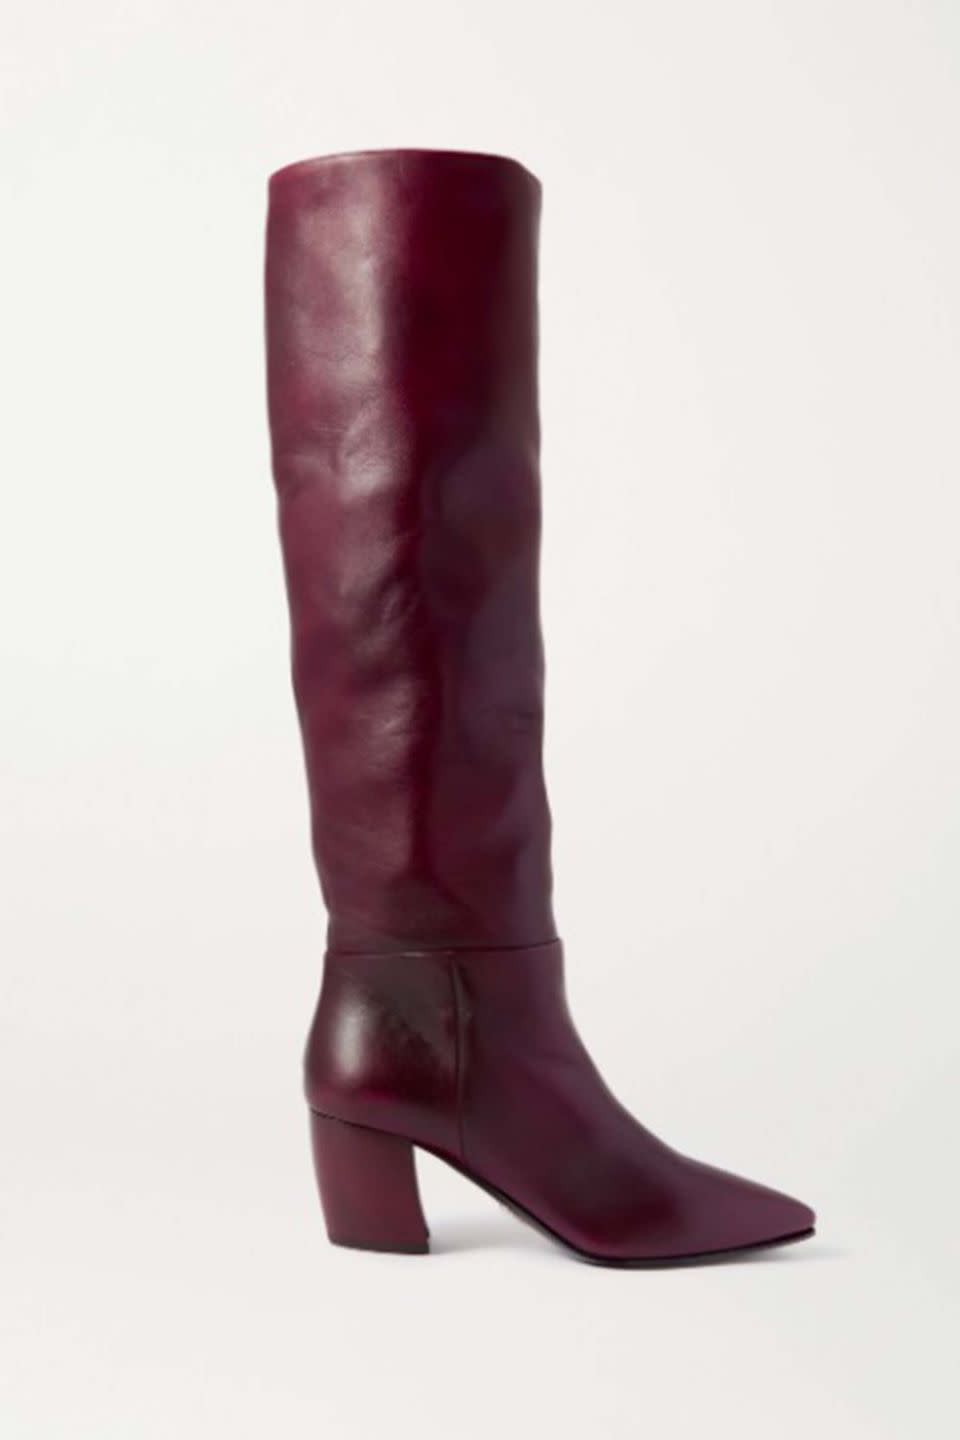 8) The burgundy boot